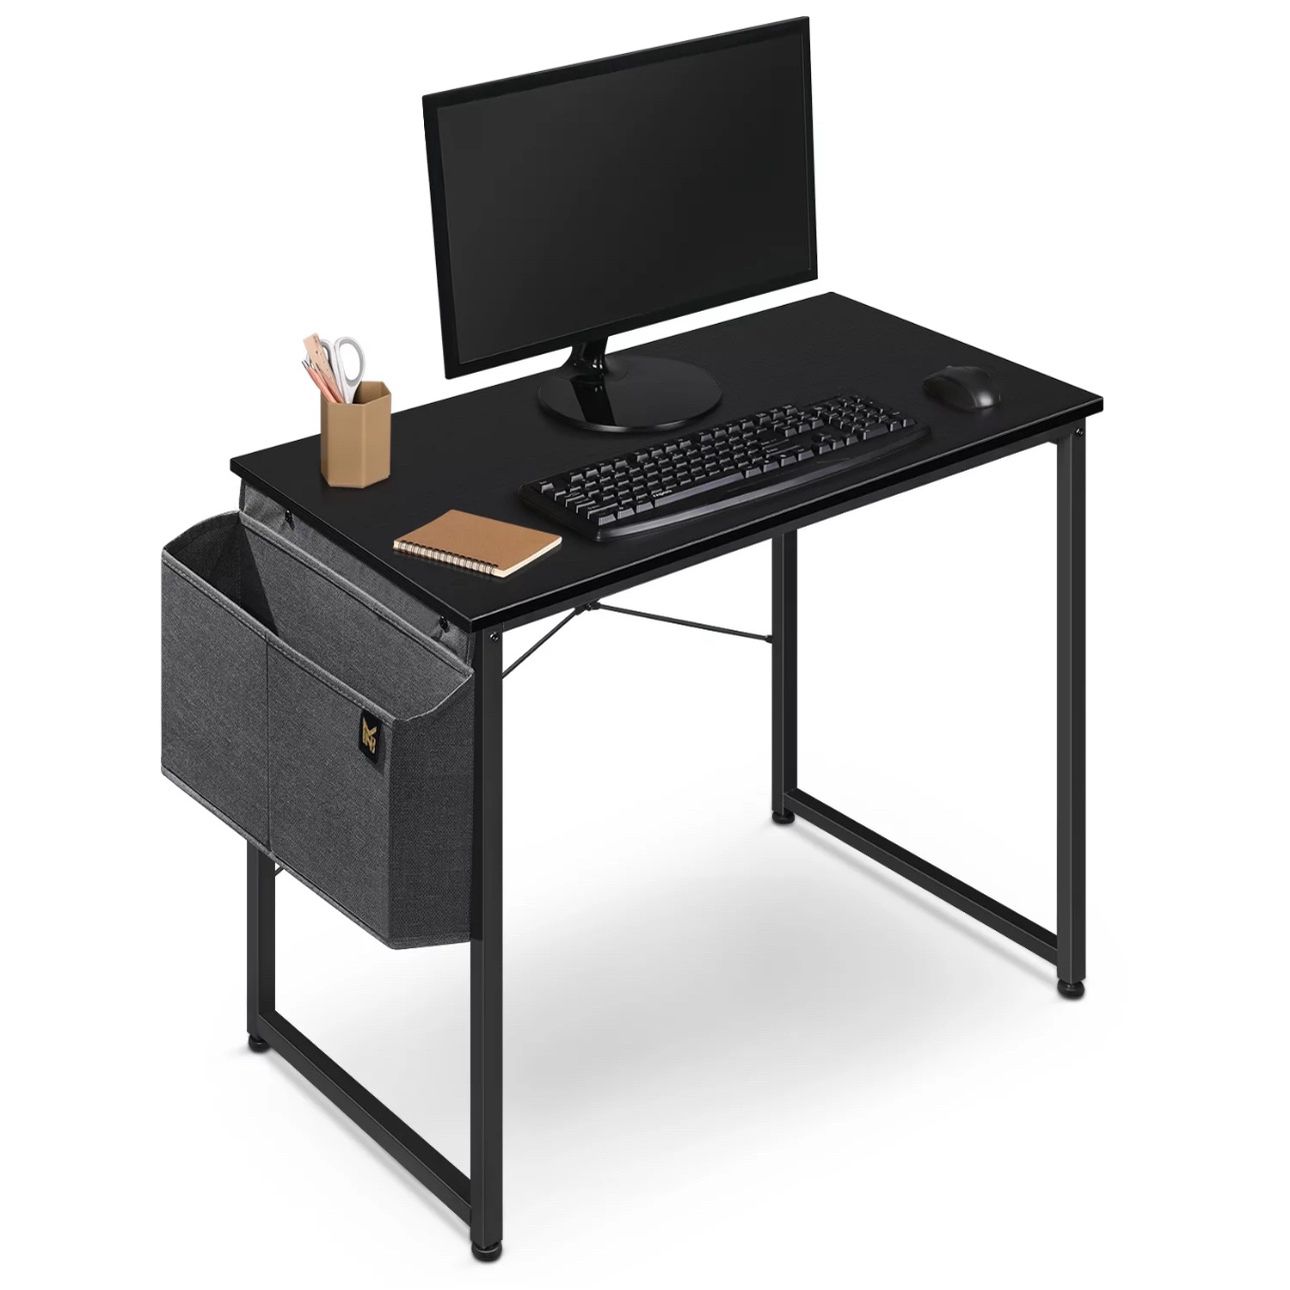 Black & Brown Color  🎁🎁Wholesale is available 🎁🎁 Diversified Scenarios】The office desk is designed with a modern simple style, suitable for differ